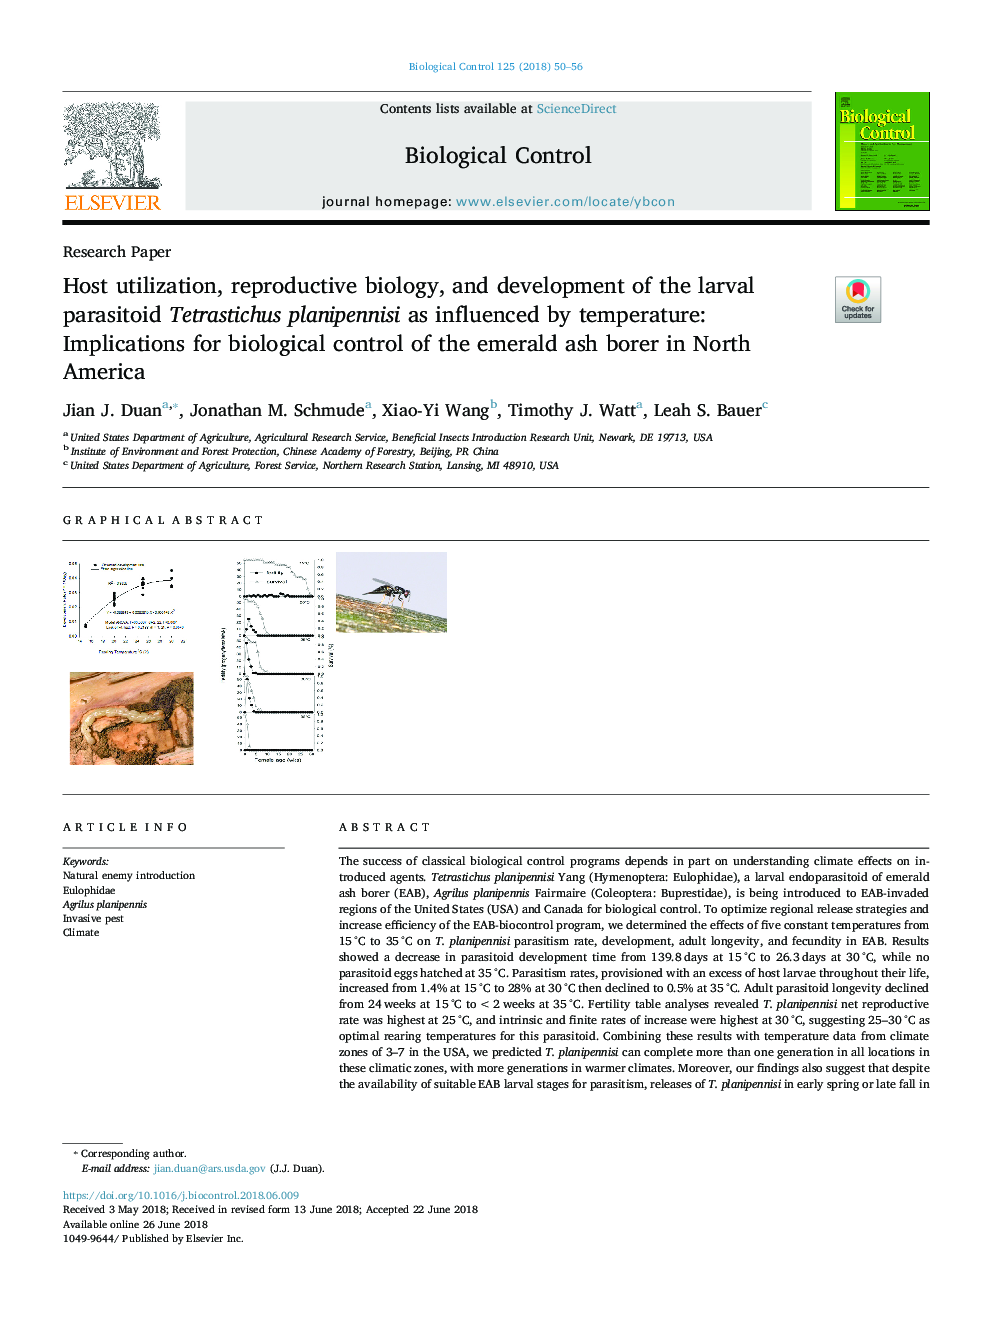 Host utilization, reproductive biology, and development of the larval parasitoid Tetrastichus planipennisi as influenced by temperature: Implications for biological control of the emerald ash borer in North America